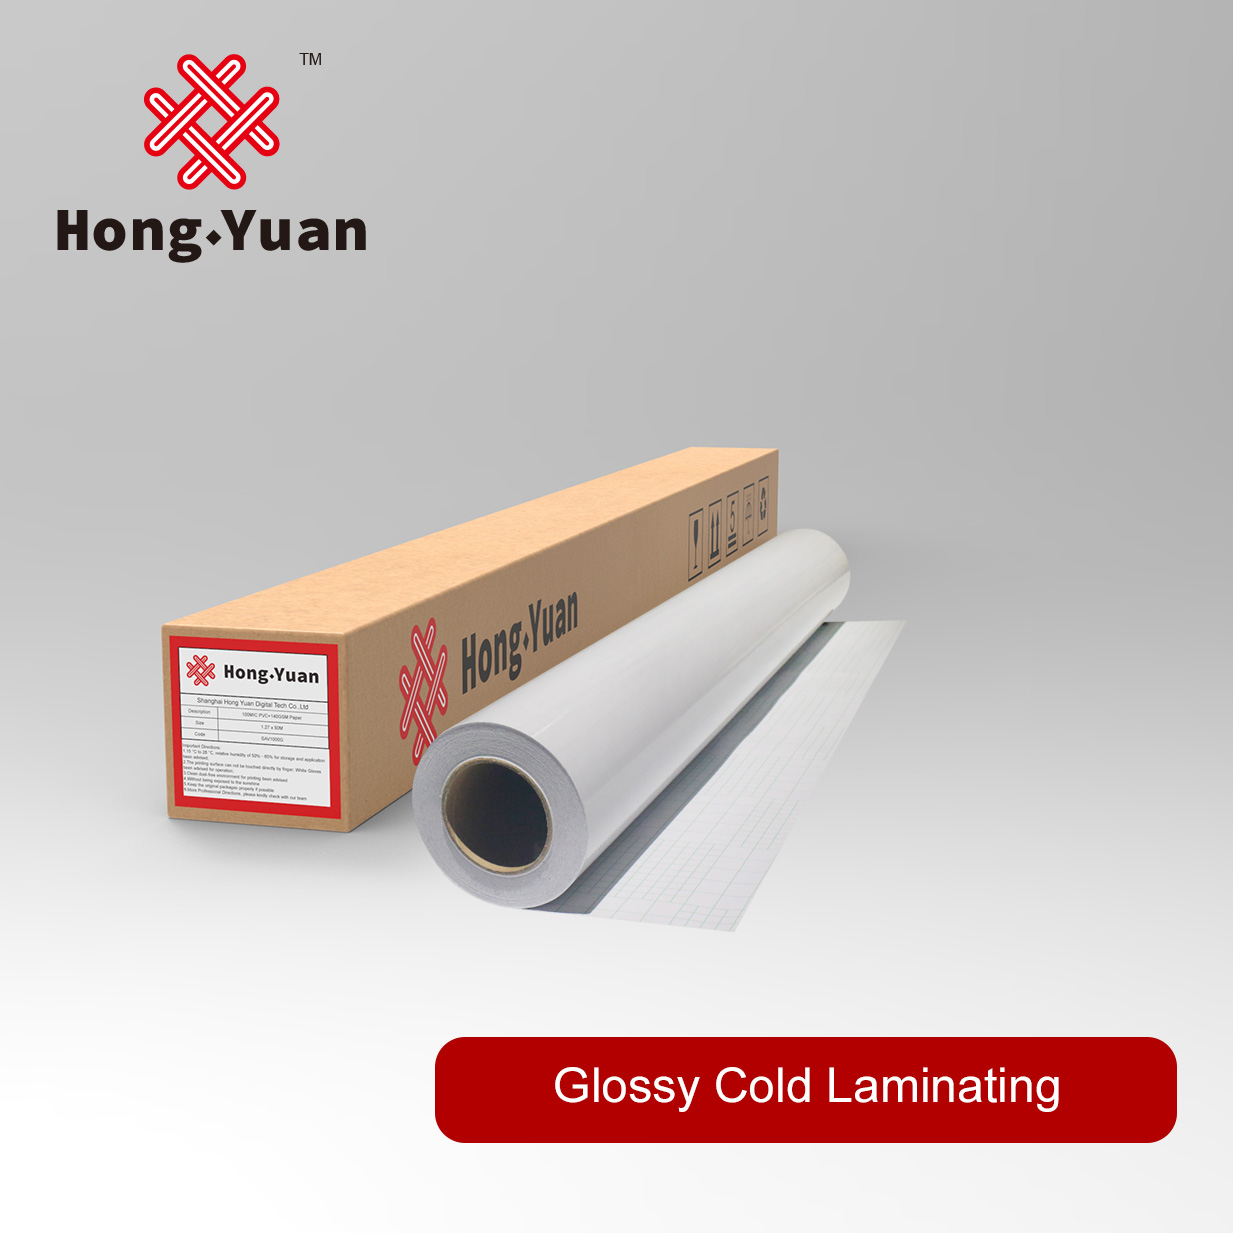 Glossy Cold Laminating CL1200G